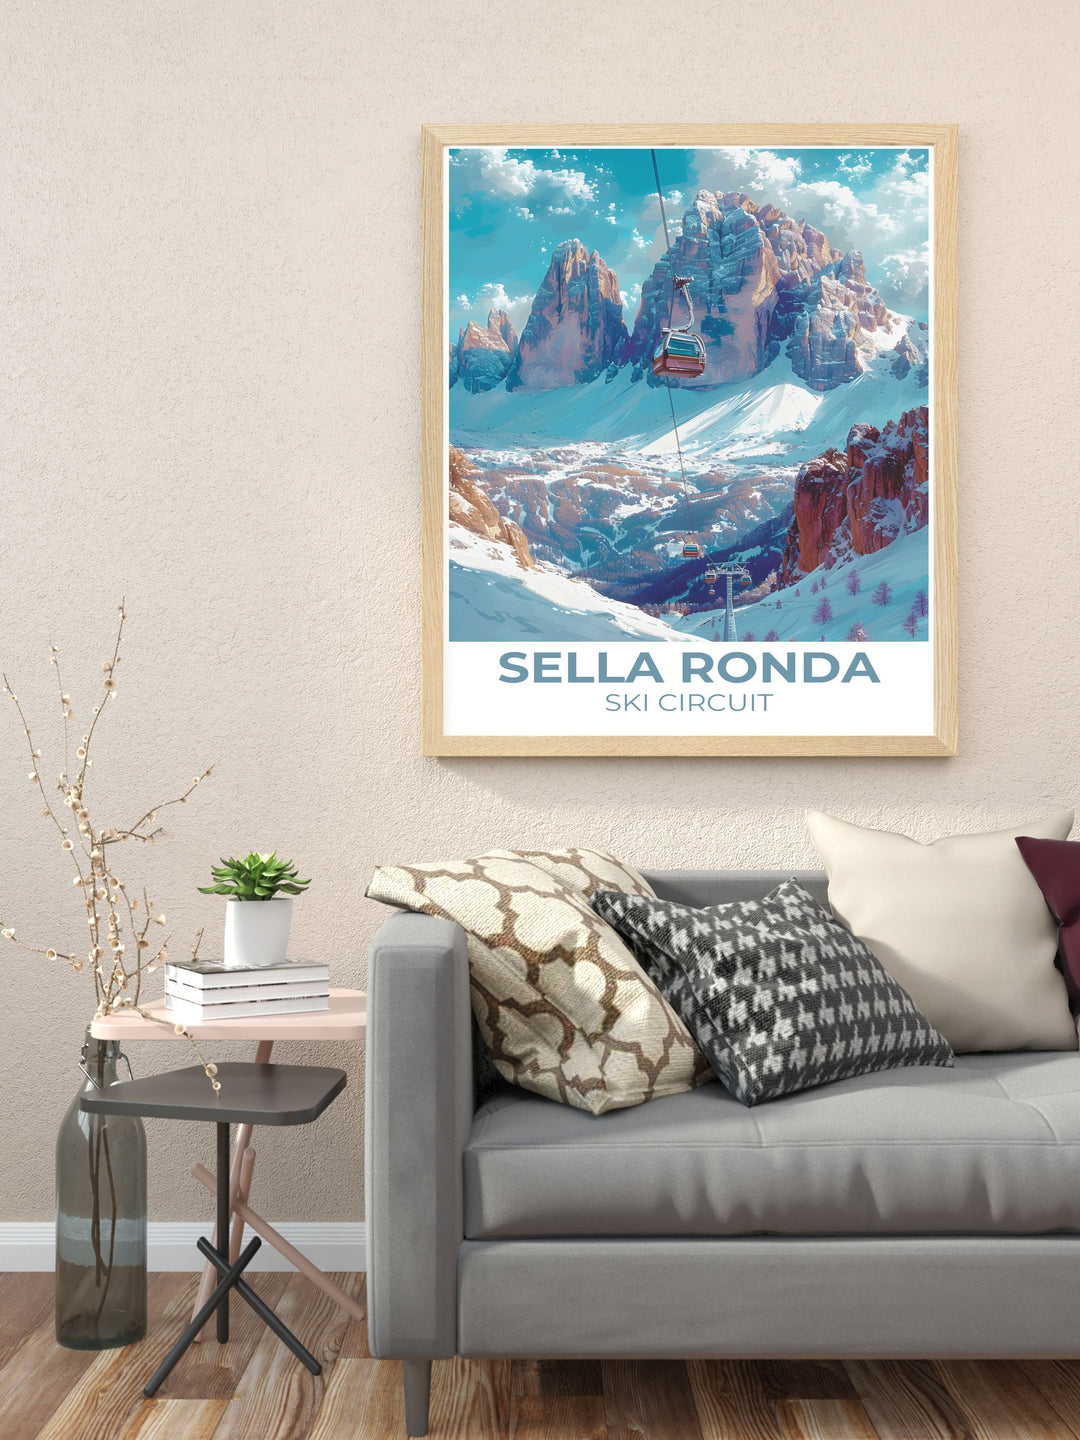 Stunning Sella Ronda Ski Circuit Wall Art featuring the Dolomites, showcasing the serene beauty and sophisticated allure of this top skiing destination.